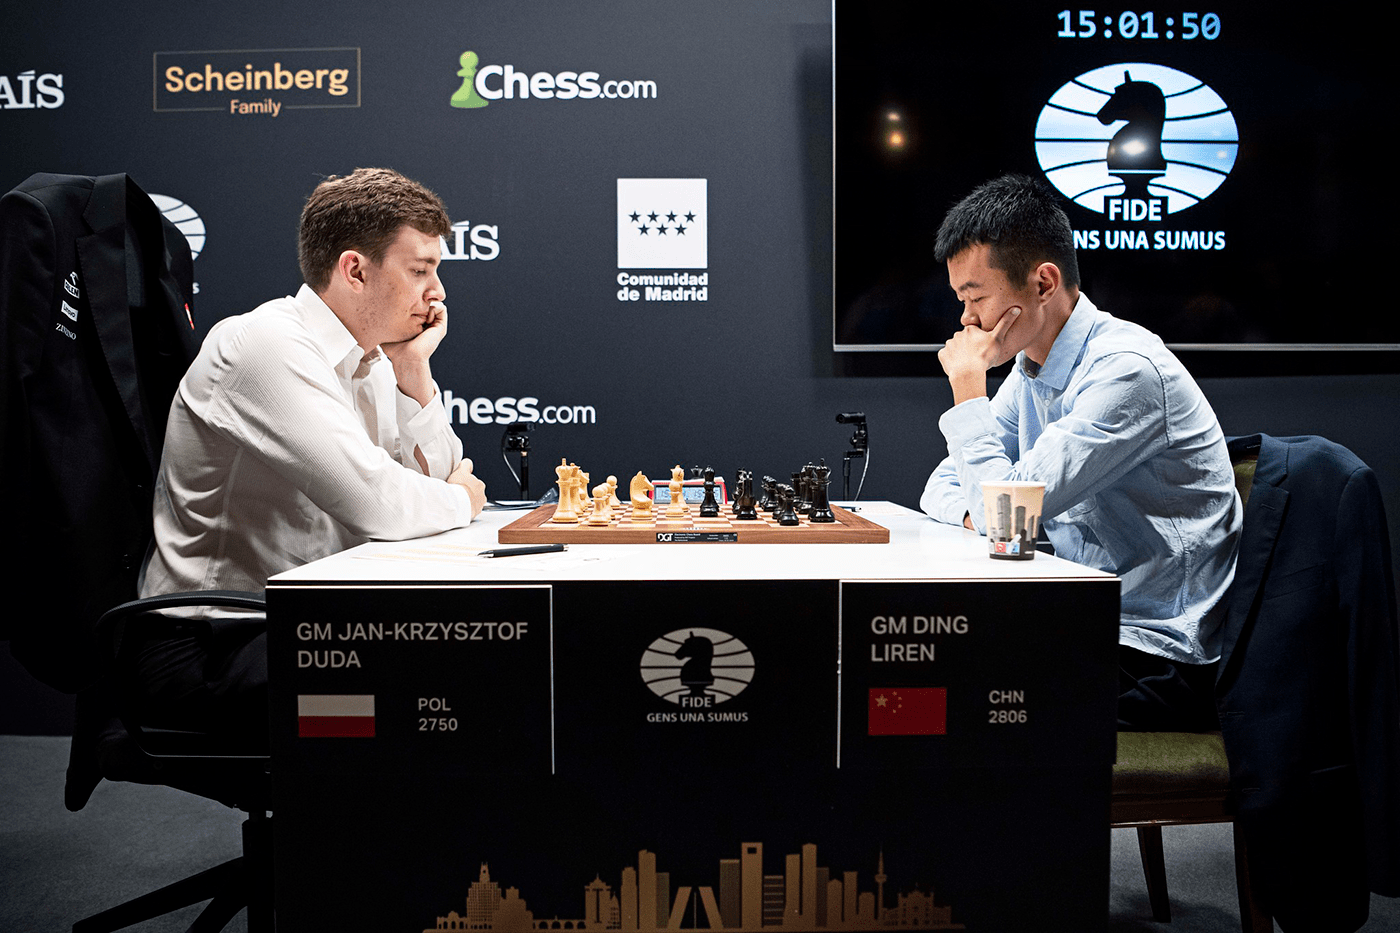 After Being Away From Classical Chess for Two Years, Hikaru Nakamura Wins a  Seat at the Candidate's Tournament - EssentiallySports